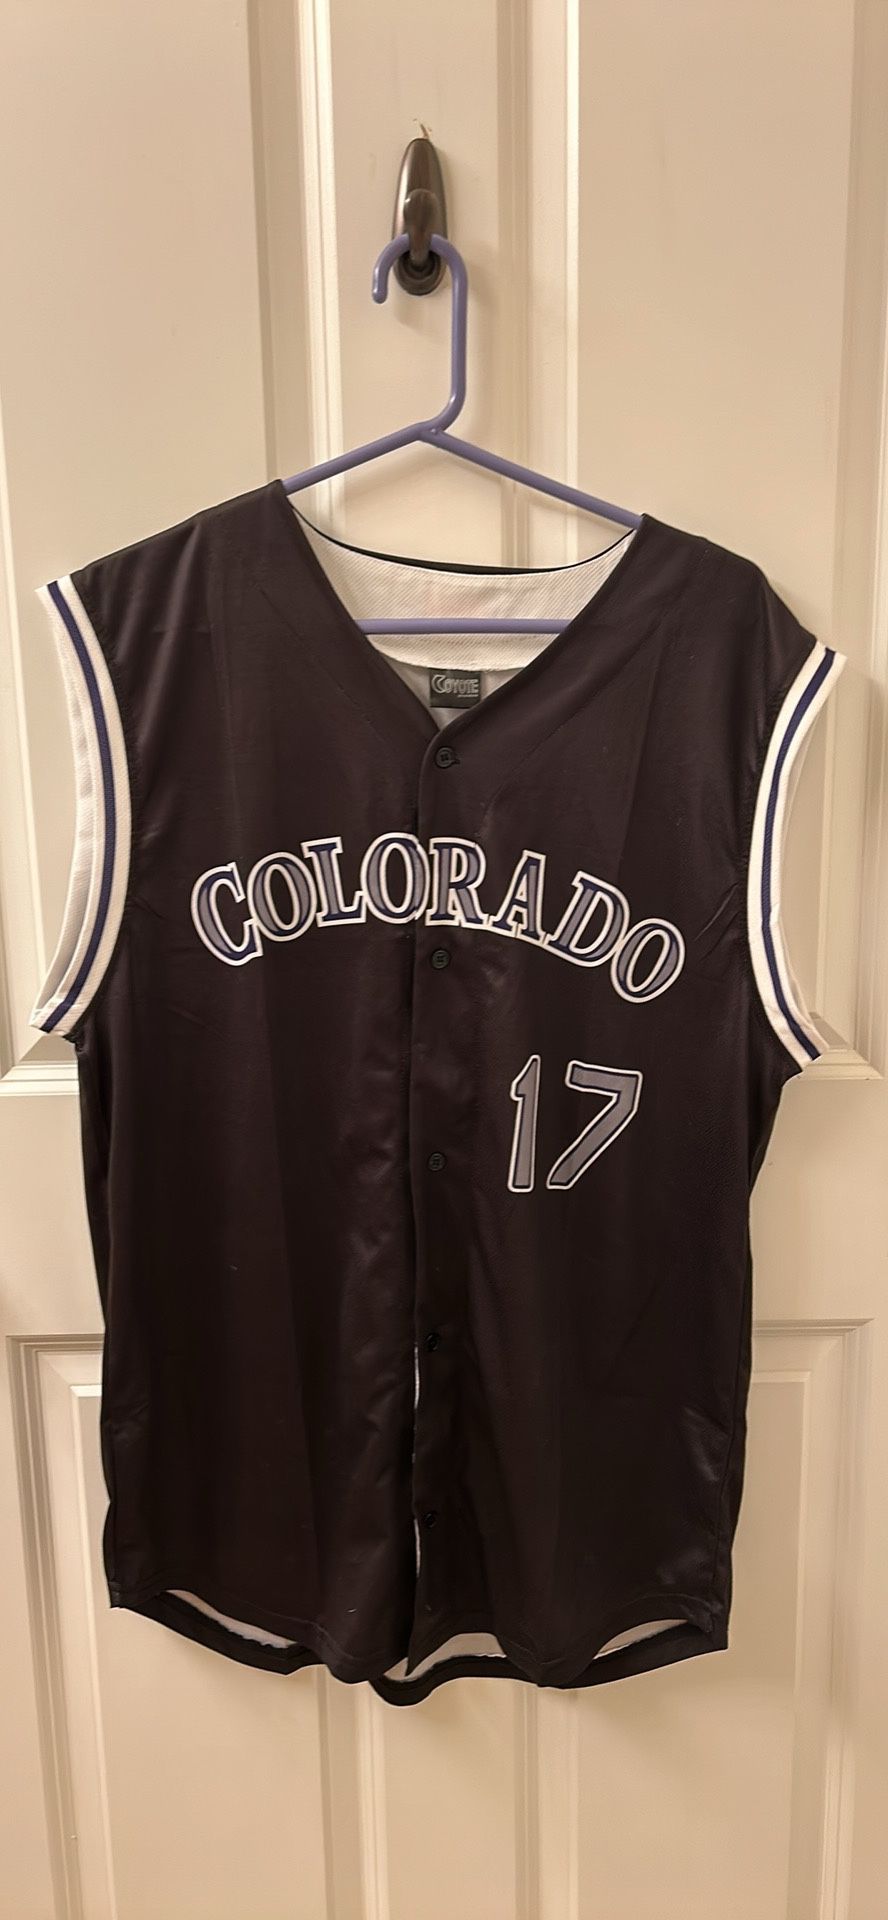 Todd Helton #17 Colorado Rockies Promotional Sleeveless Jersey (One Size fits all) 